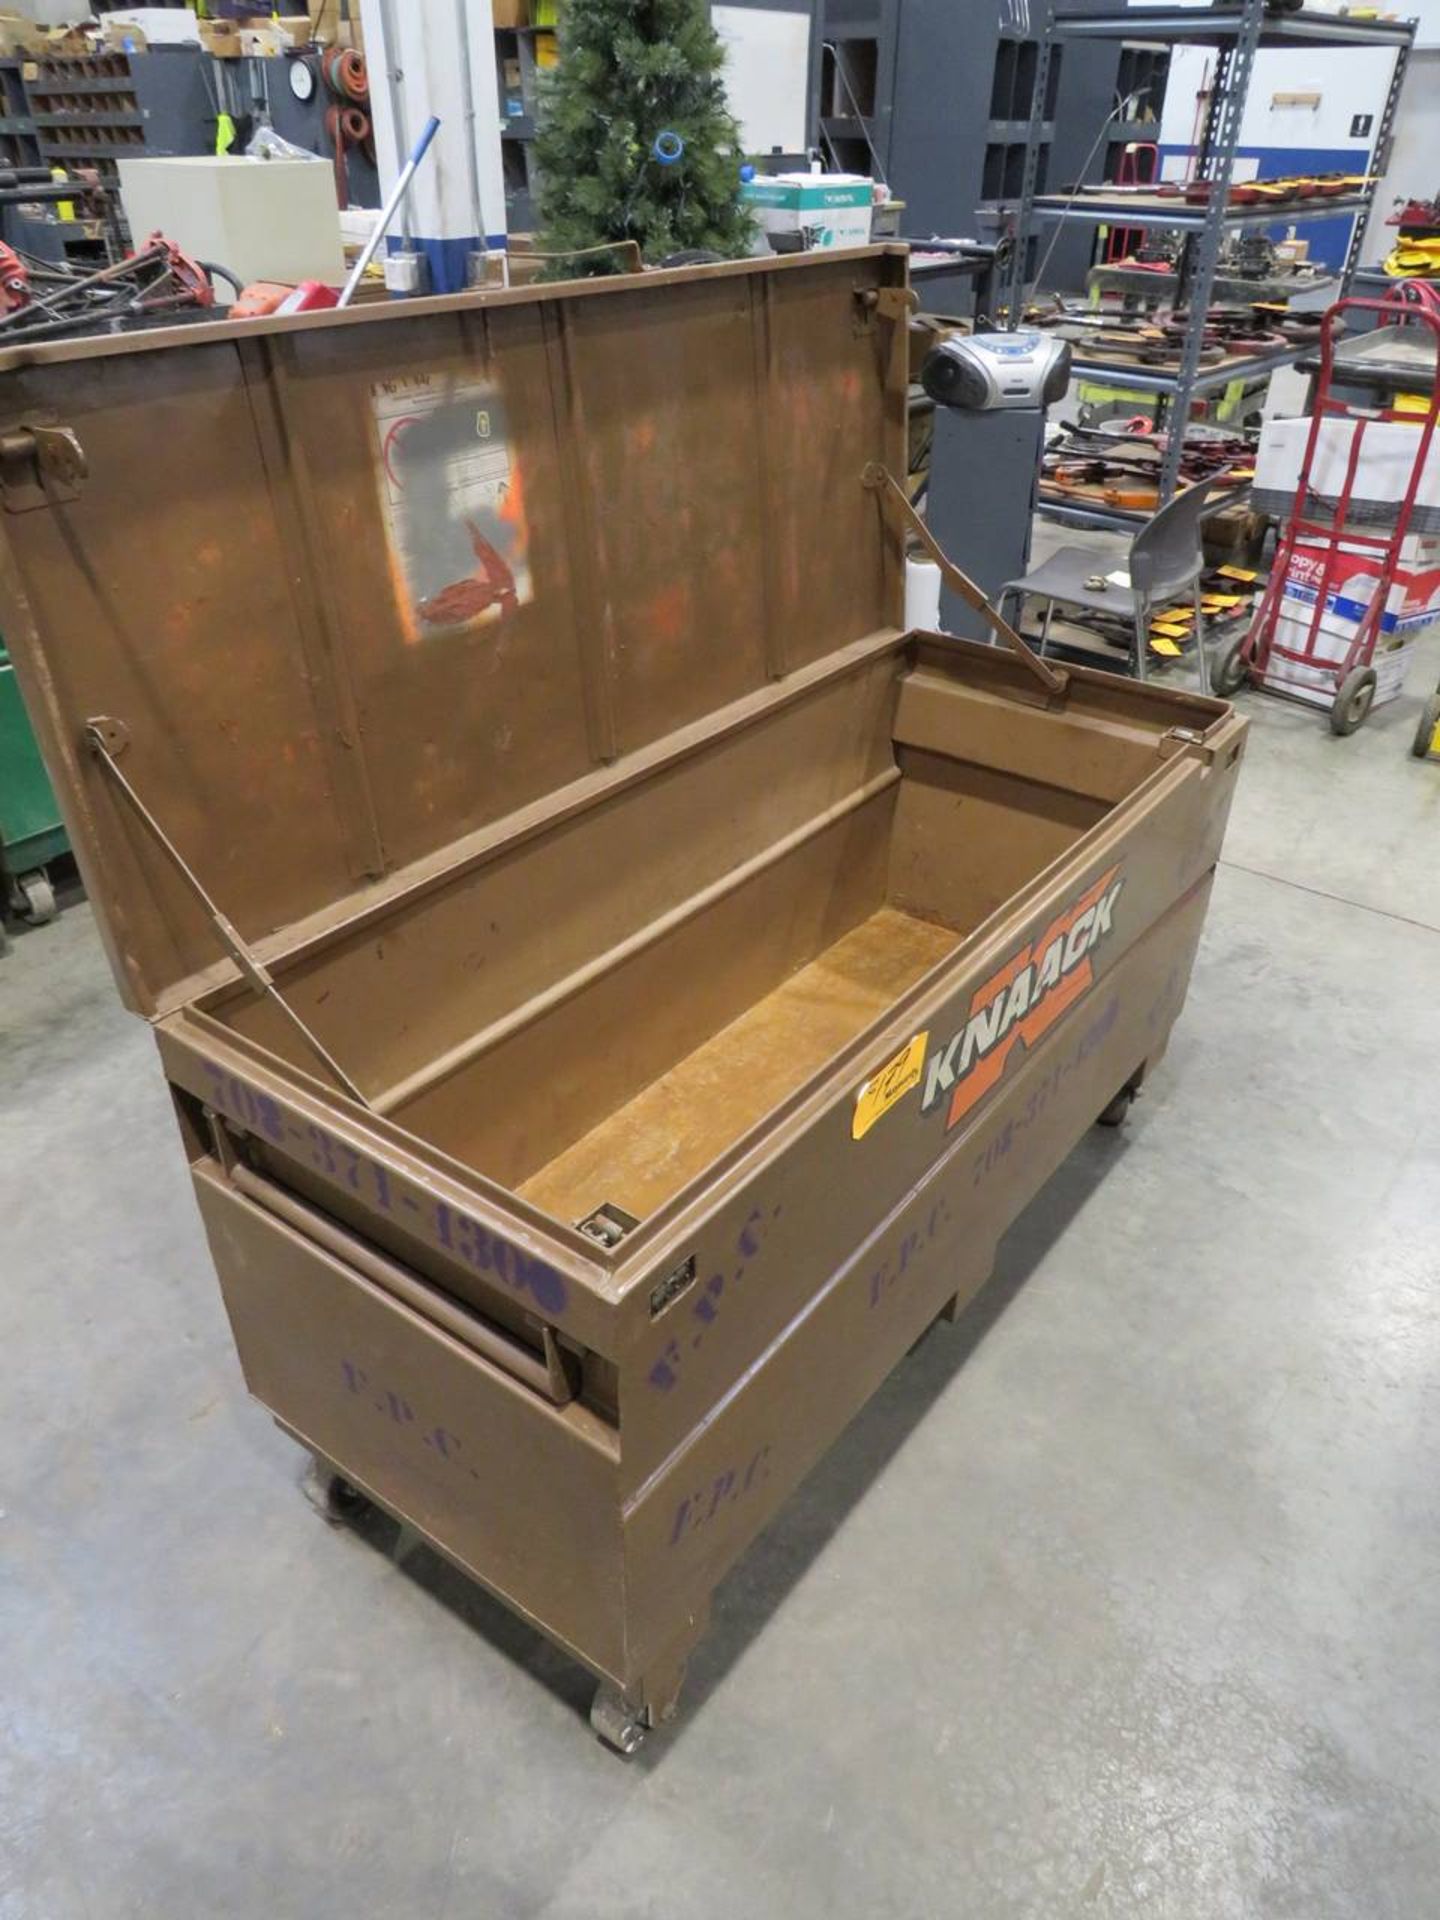 Knaack 20.25 Cu. Ft. - Approx. 60" W x 24" D x 35" H Storage Chest - Image 6 of 7